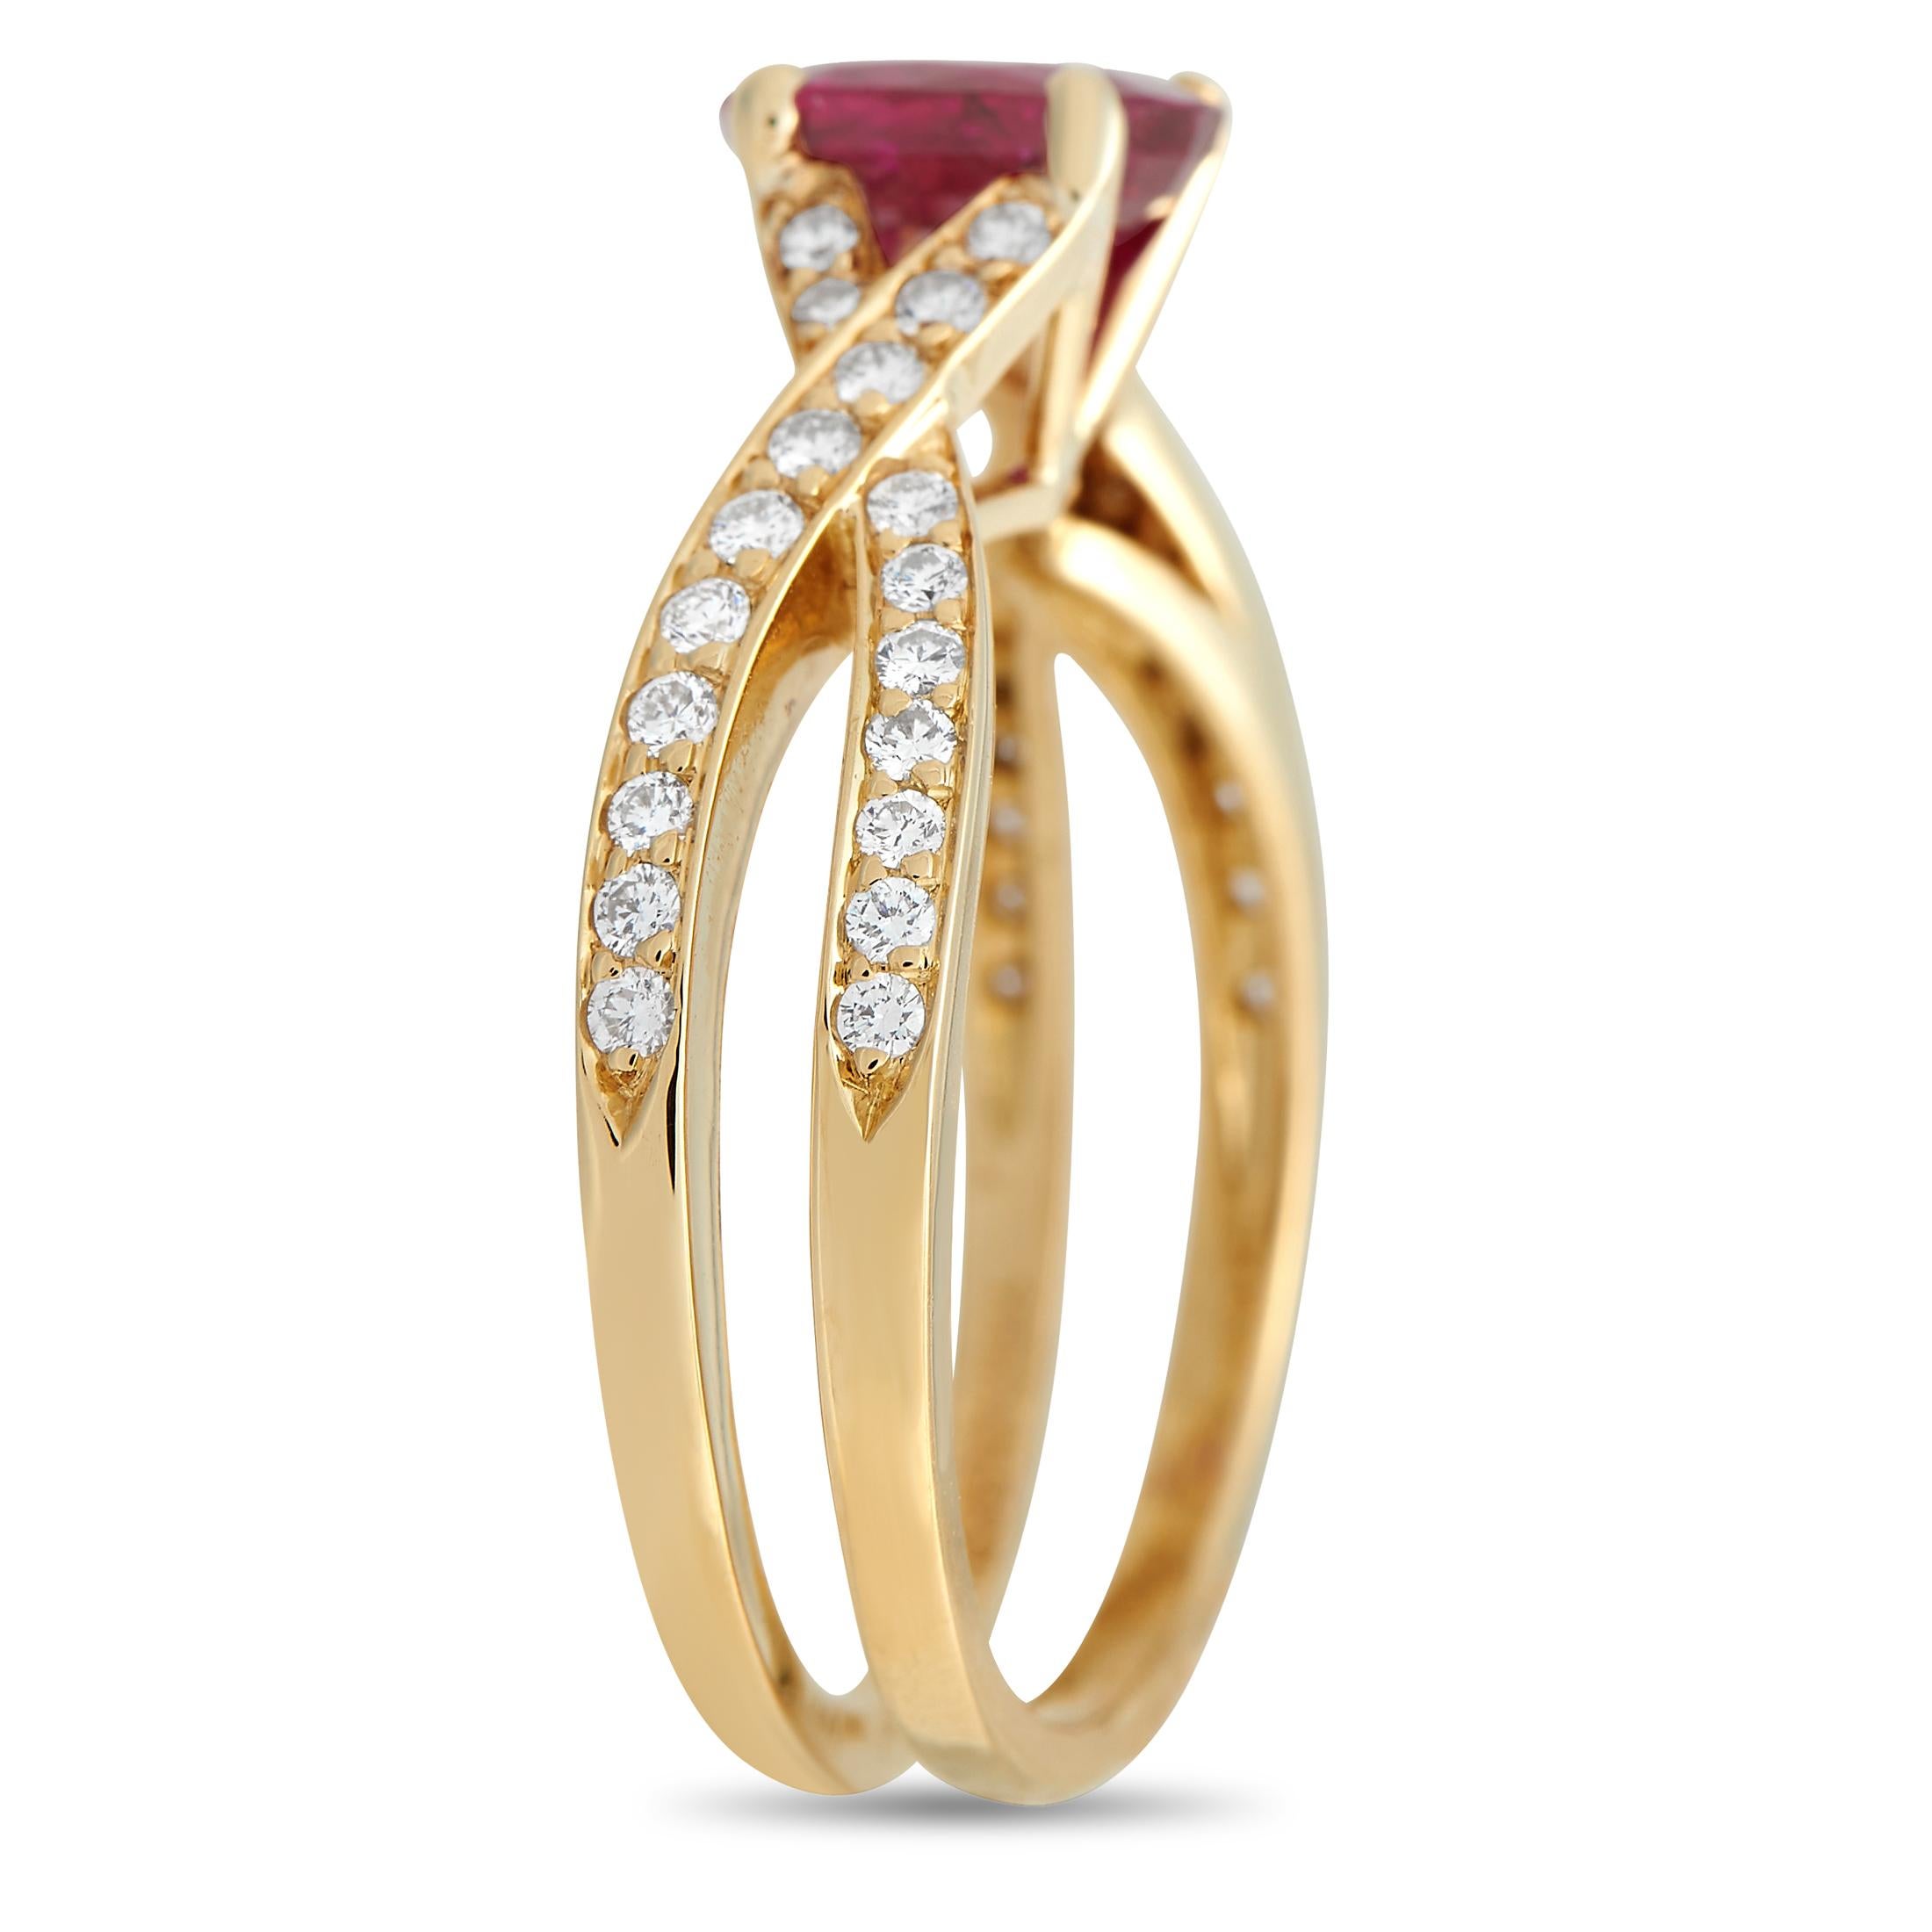 A ring that epitomizes grace and class. This Tiffany & Co. ring in 18K yellow gold features two slender bands that cross and come together to elegantly carry a stunning 1.32 ct ruby center stone. The colored central gem is mounted on a V-prong